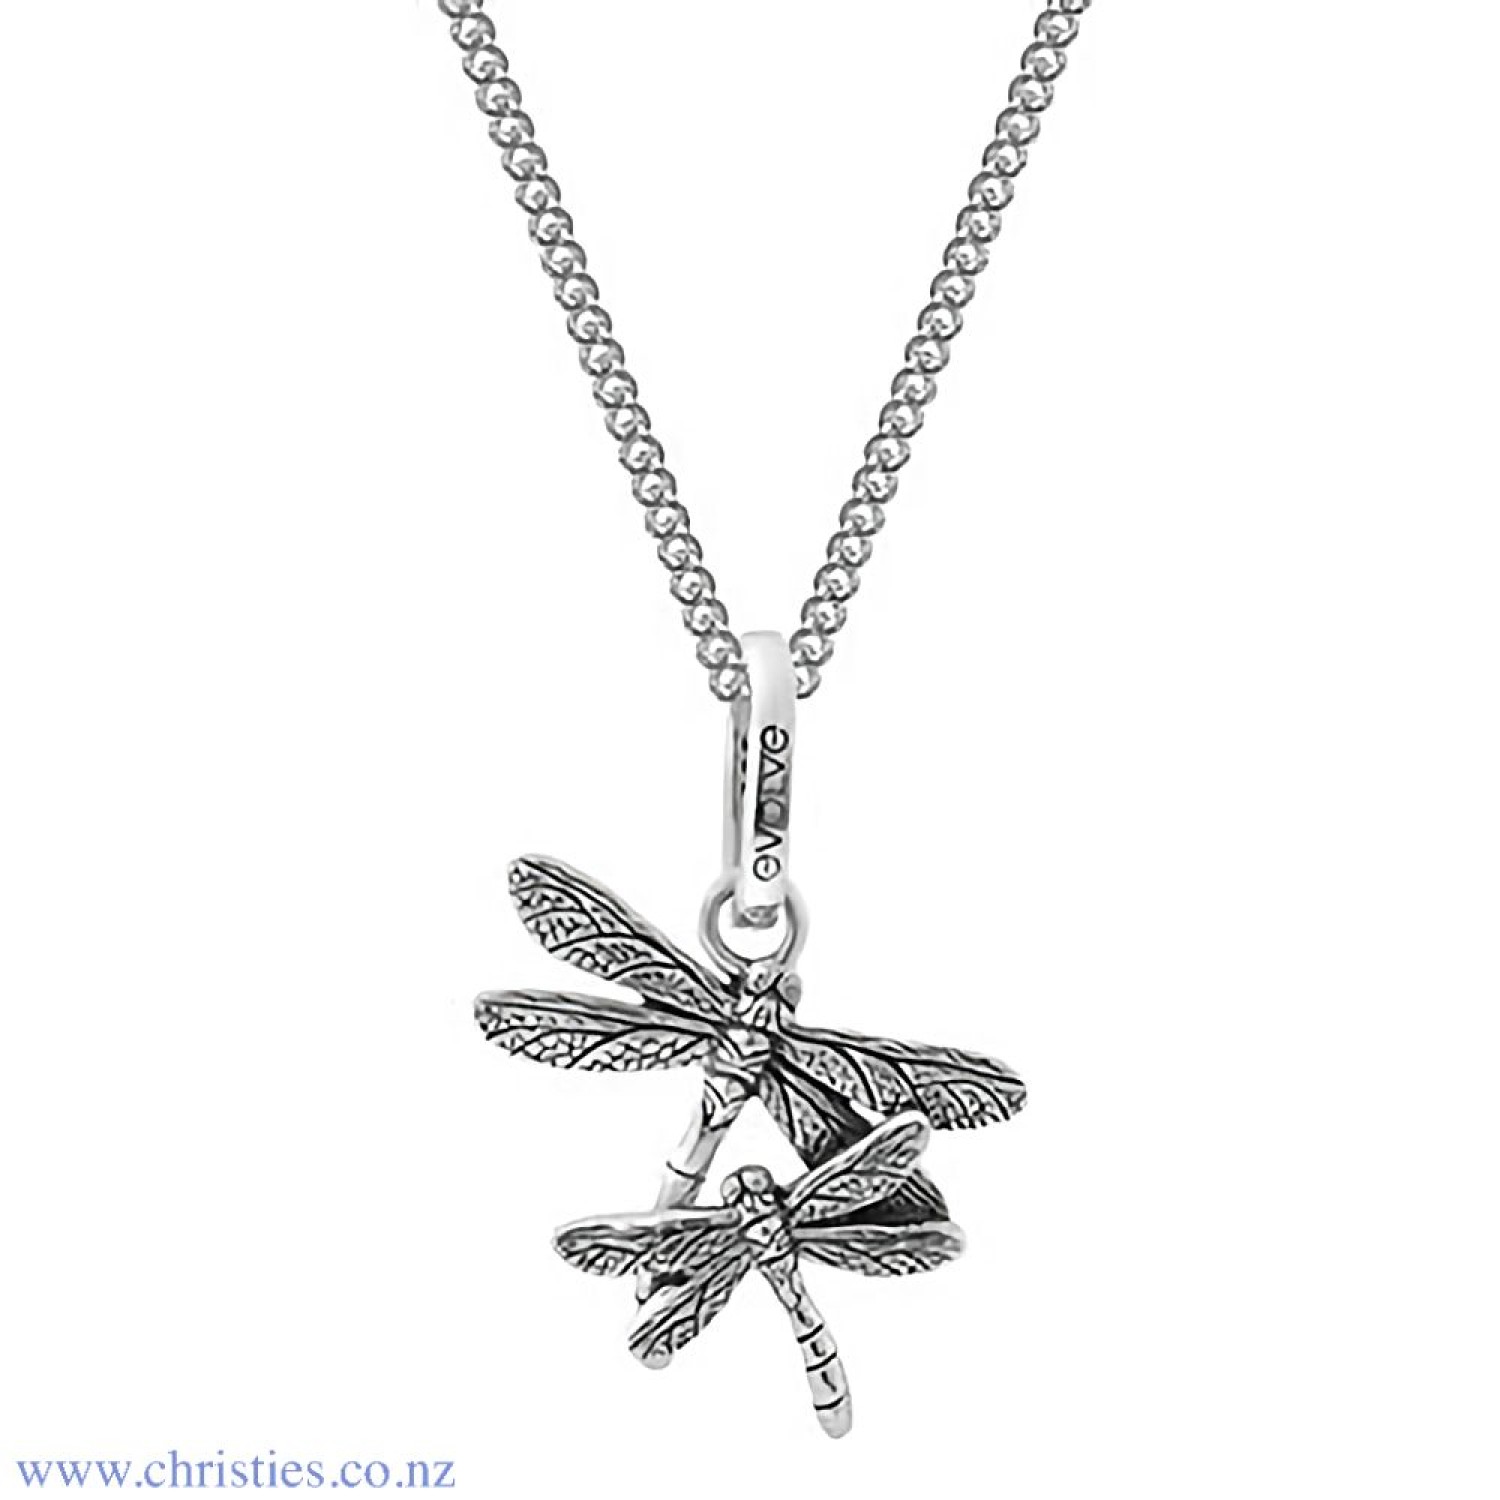 2P61000 Evolve NZ Dragonfly Pendant. The native NZ Dragonfly is a fast moving creature of the wind, and symbolises change and new beginnings. This pendant gives you the inner strength to create something new and fresh, and embrace the winds of change. &am